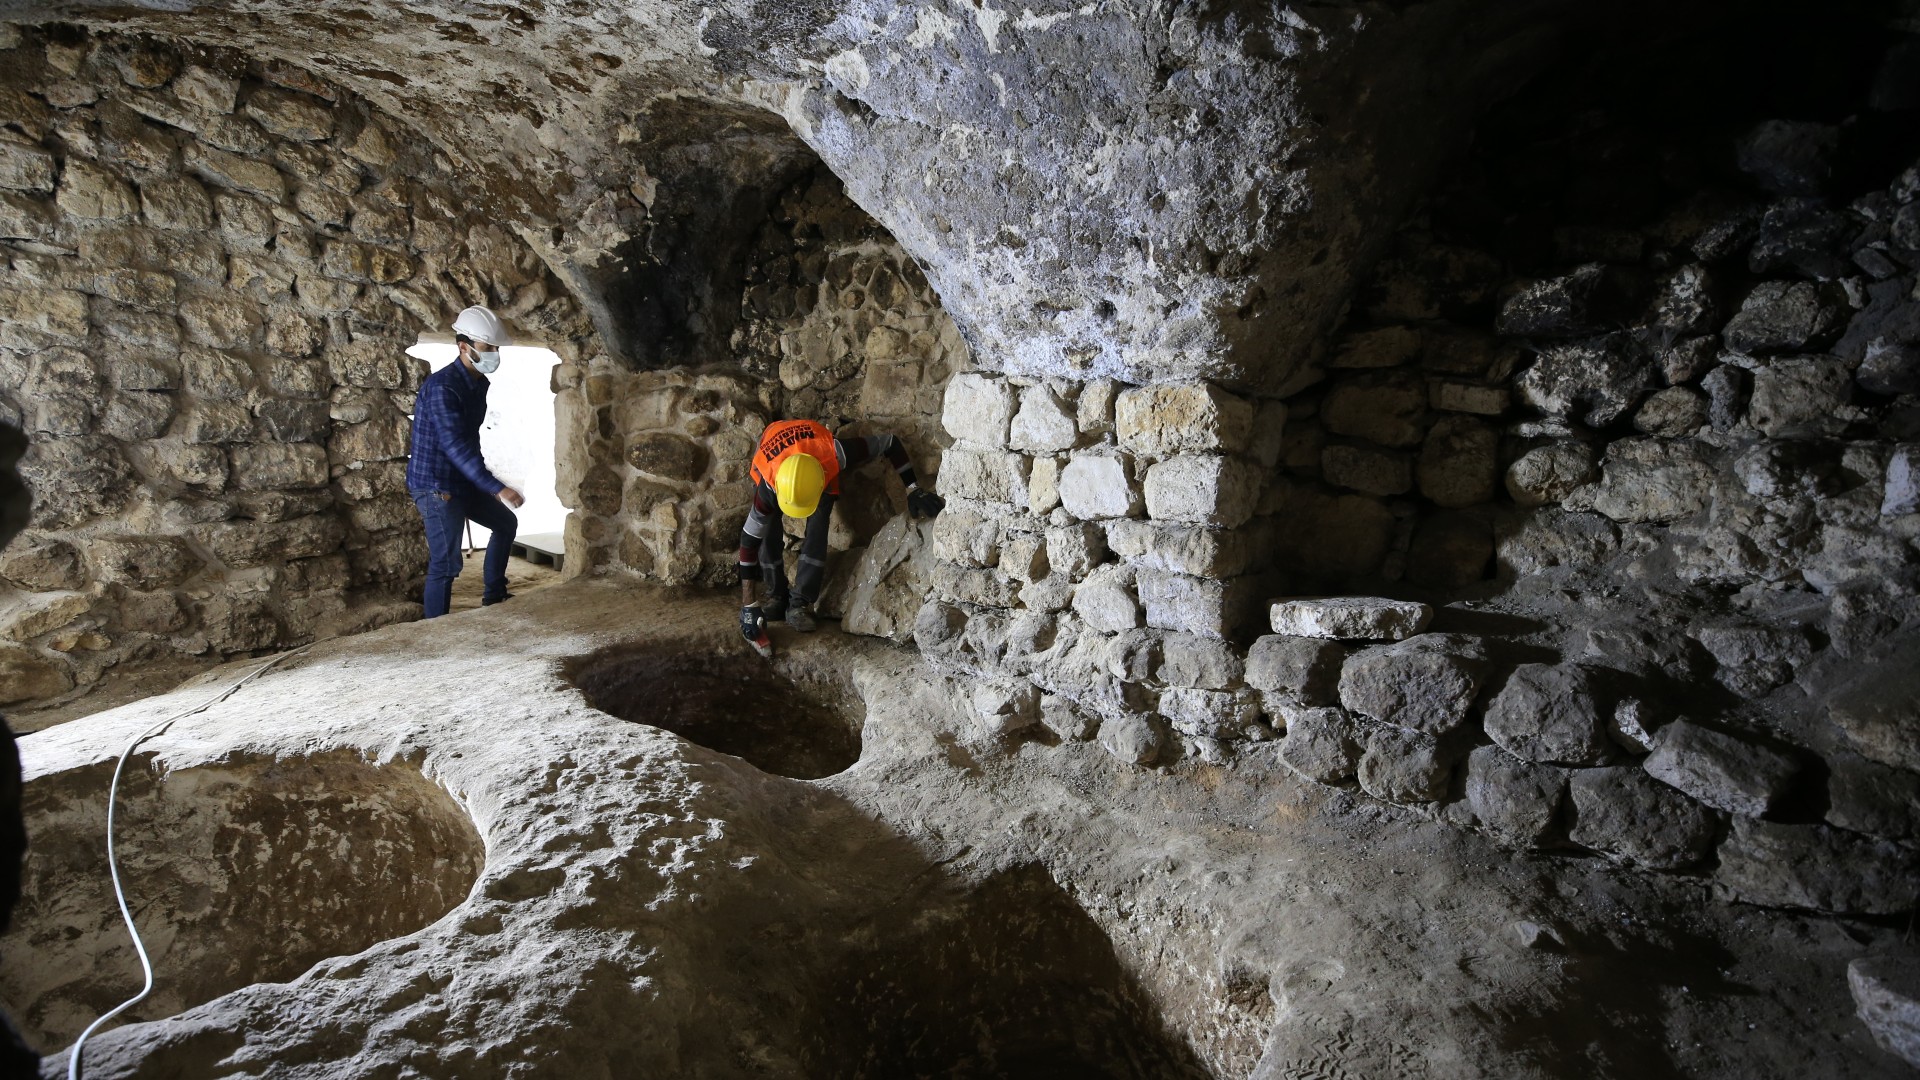 Two people who are wearing hard hats, masks and high visibility safety vests are exploring an underground cave thought to be a city. The walls are lined with large stone bricks and there are three circular holes on the floor.